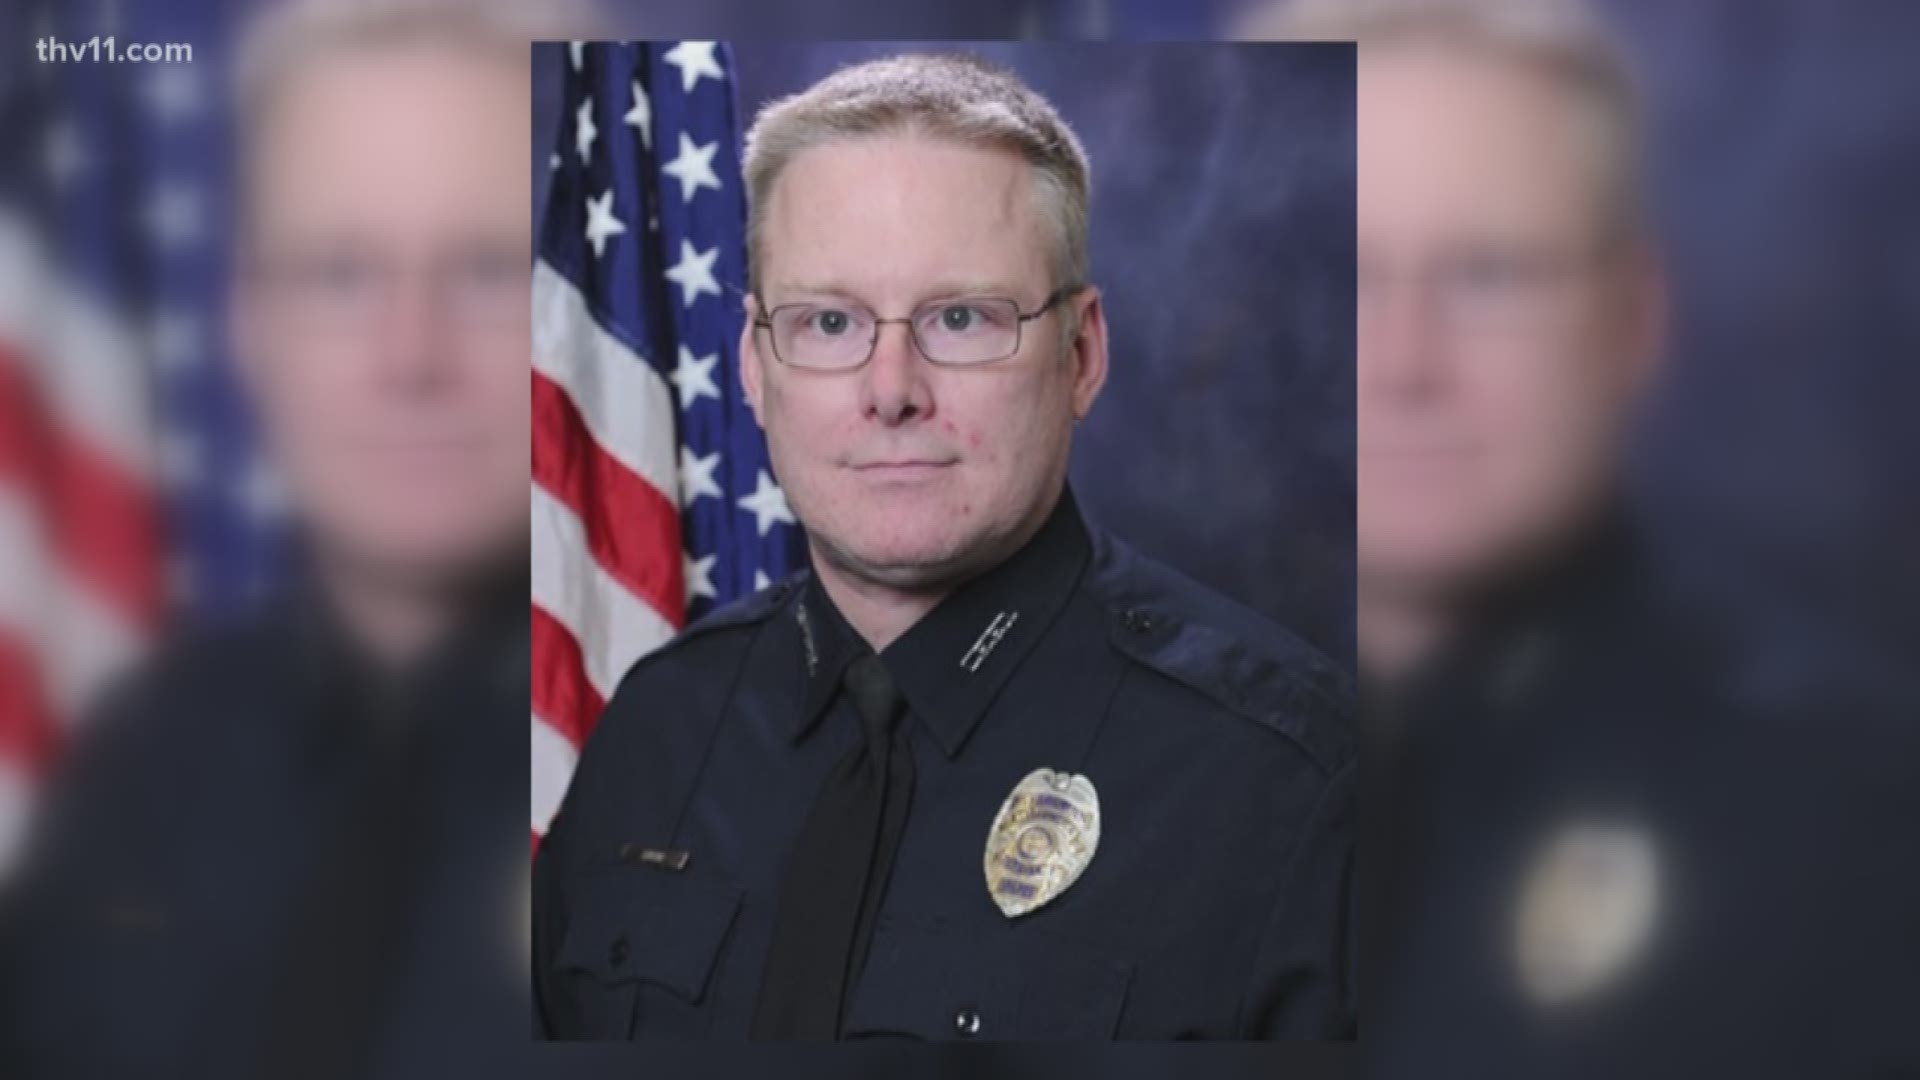 Officer Eddie Seaton was indicted on child pornography charges after an investigation was opened by the LRPD and the FBI.